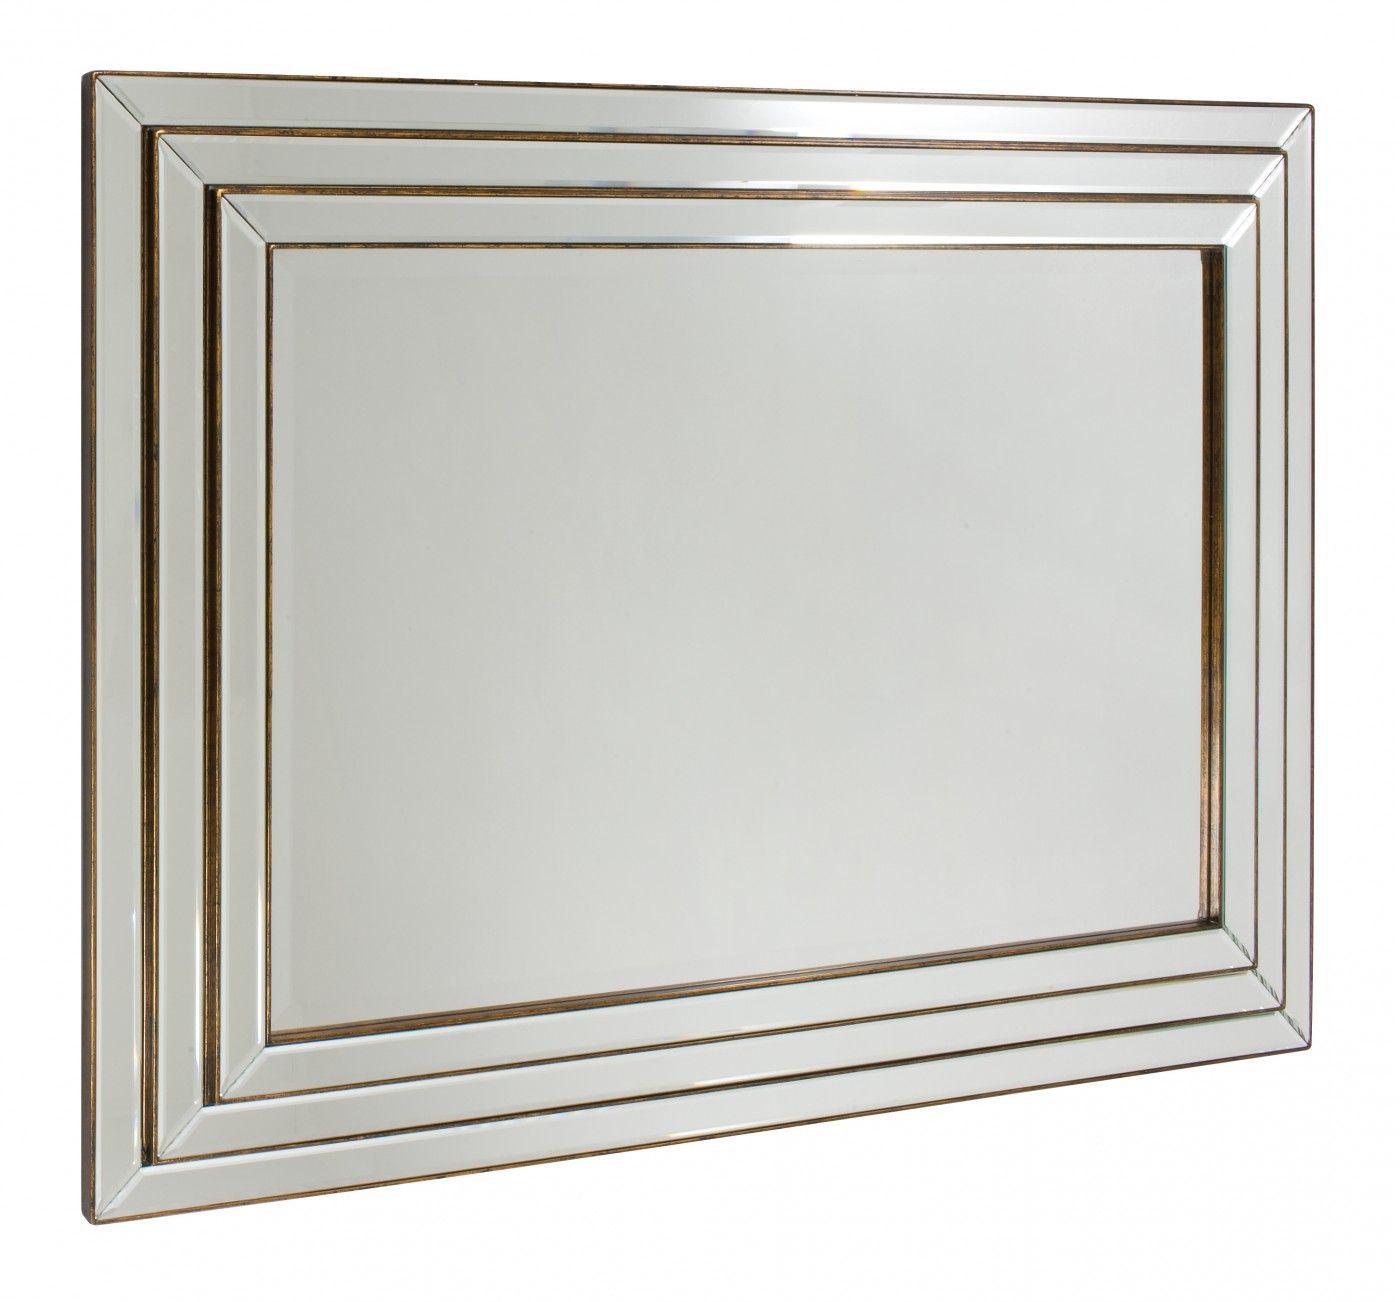 Chantel Wall Mirror Bronze In 2019 | Rustic Wall Mirrors, Mirror Intended For Silver And Bronze Wall Mirrors (View 4 of 15)